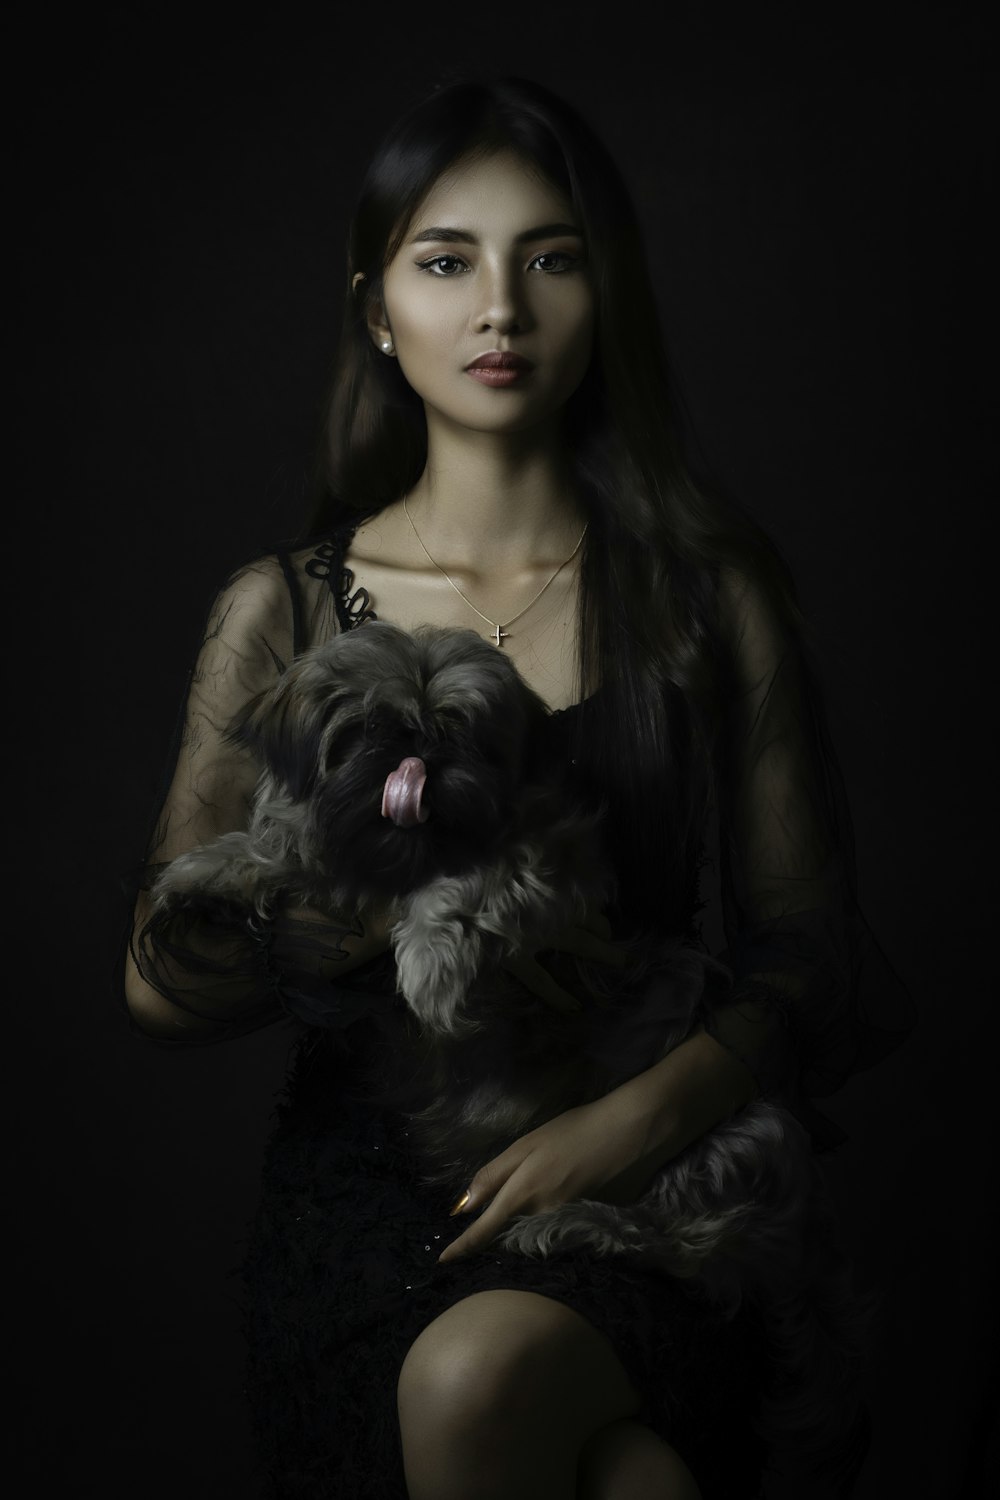 woman in brown sleeveless top holding black and white long coated small dog